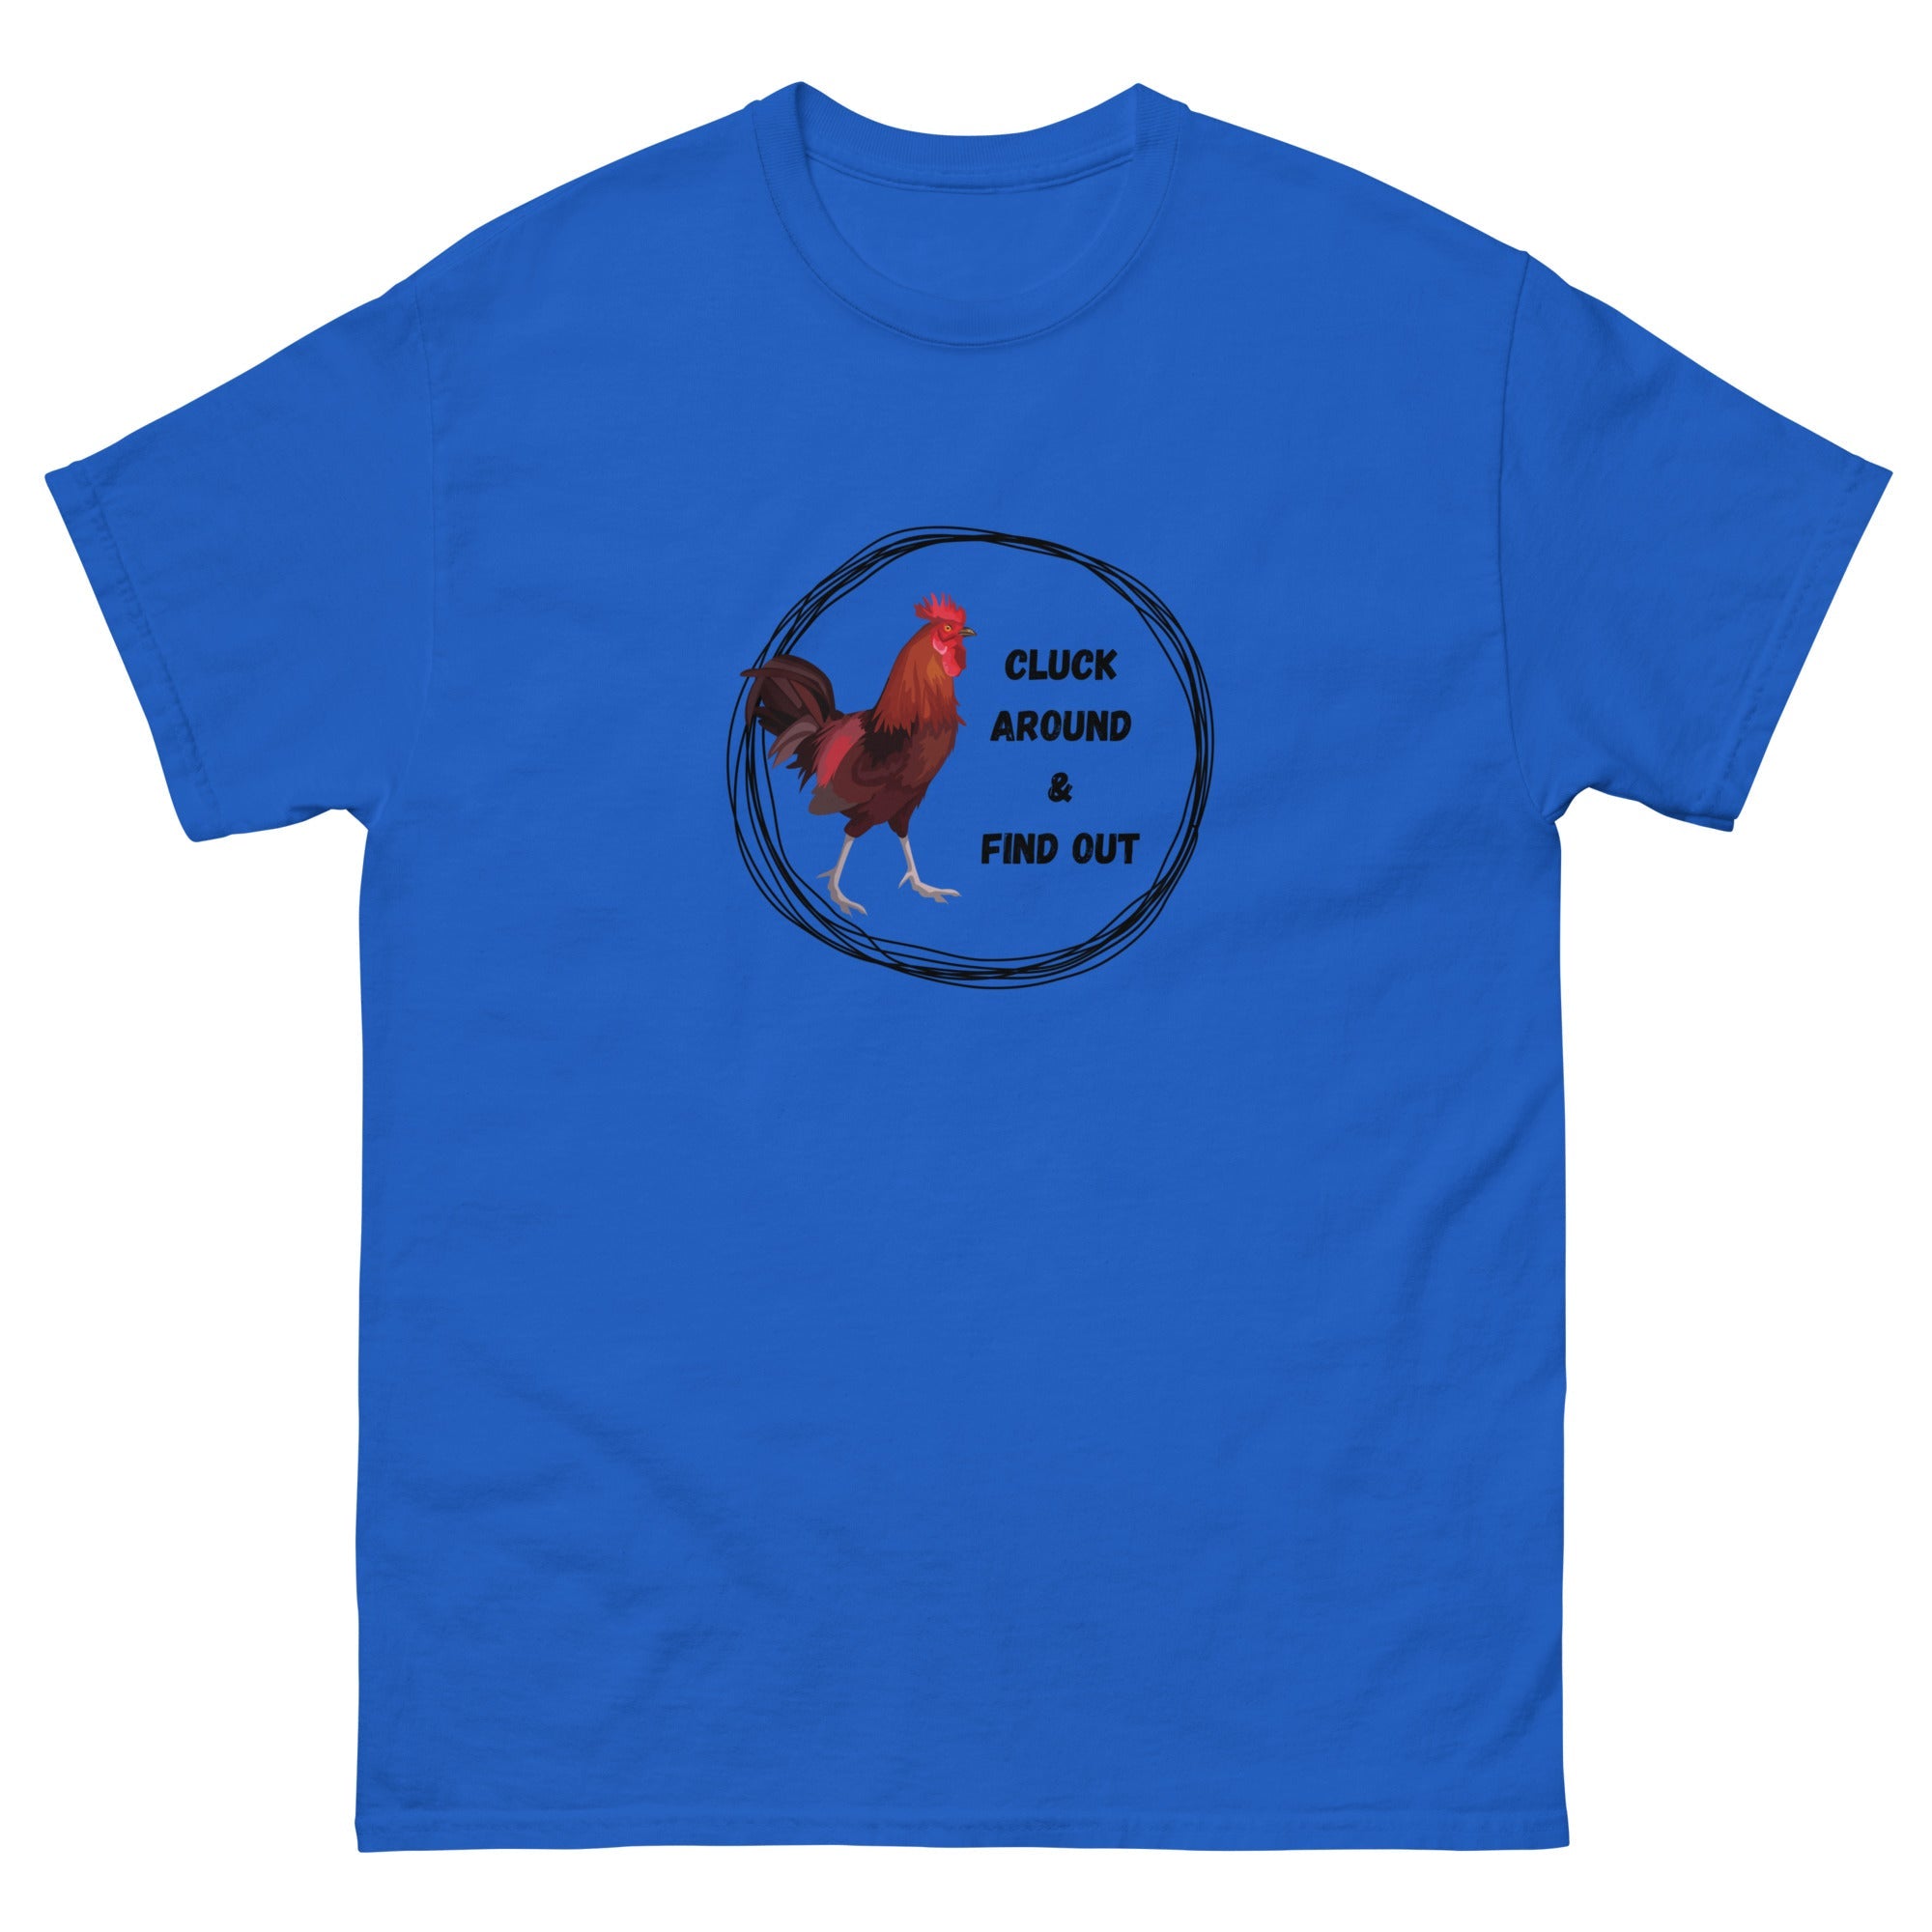 Cluck Around & Find Out Men's Classic Tee - Cluck It All Farms